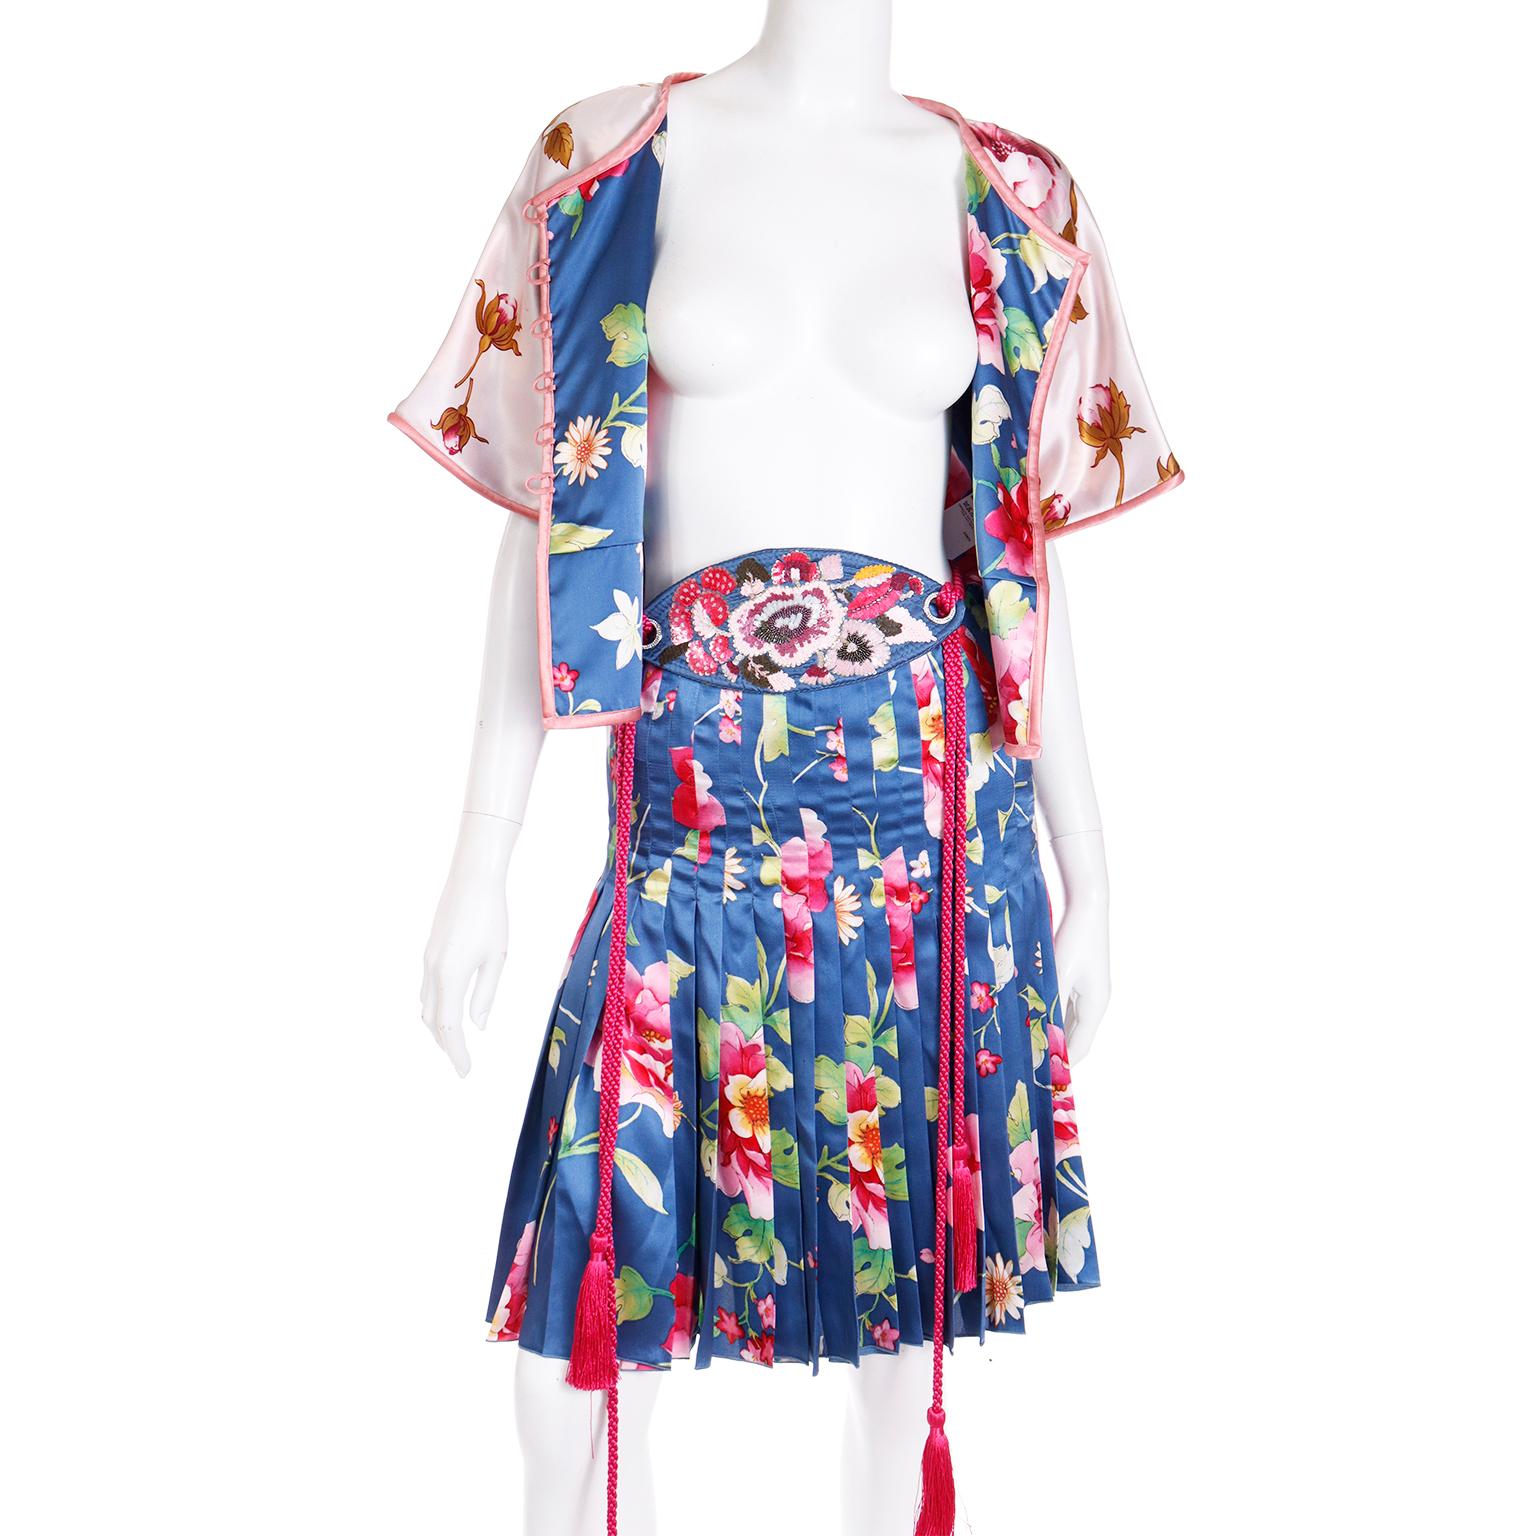 Valentino 2006 Blue & Pink Floral Silk Skirt and Top Runway Outfit w Beaded Belt 1